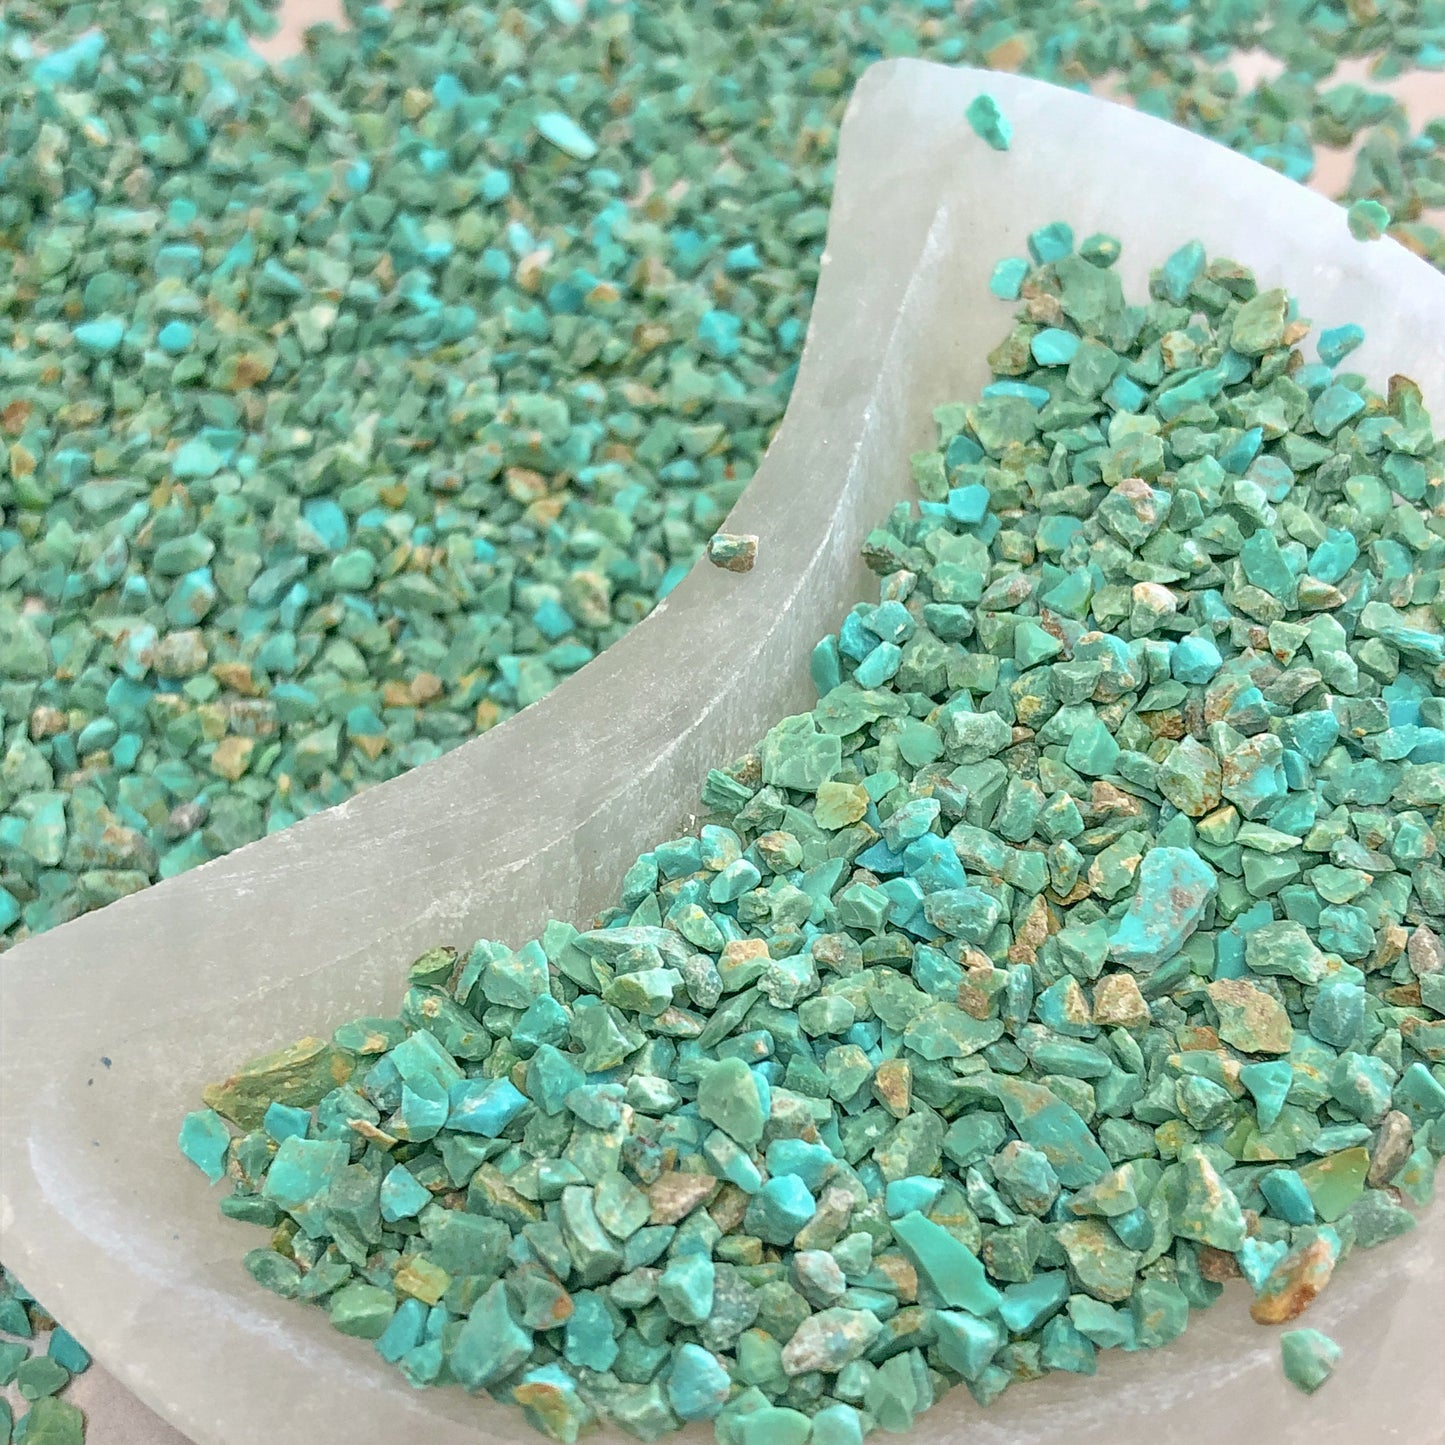 Crushed Blue-Green Sonoran Turquoise from Mexico, Coarse Crush, Gravel Size, 4mm - 2mm